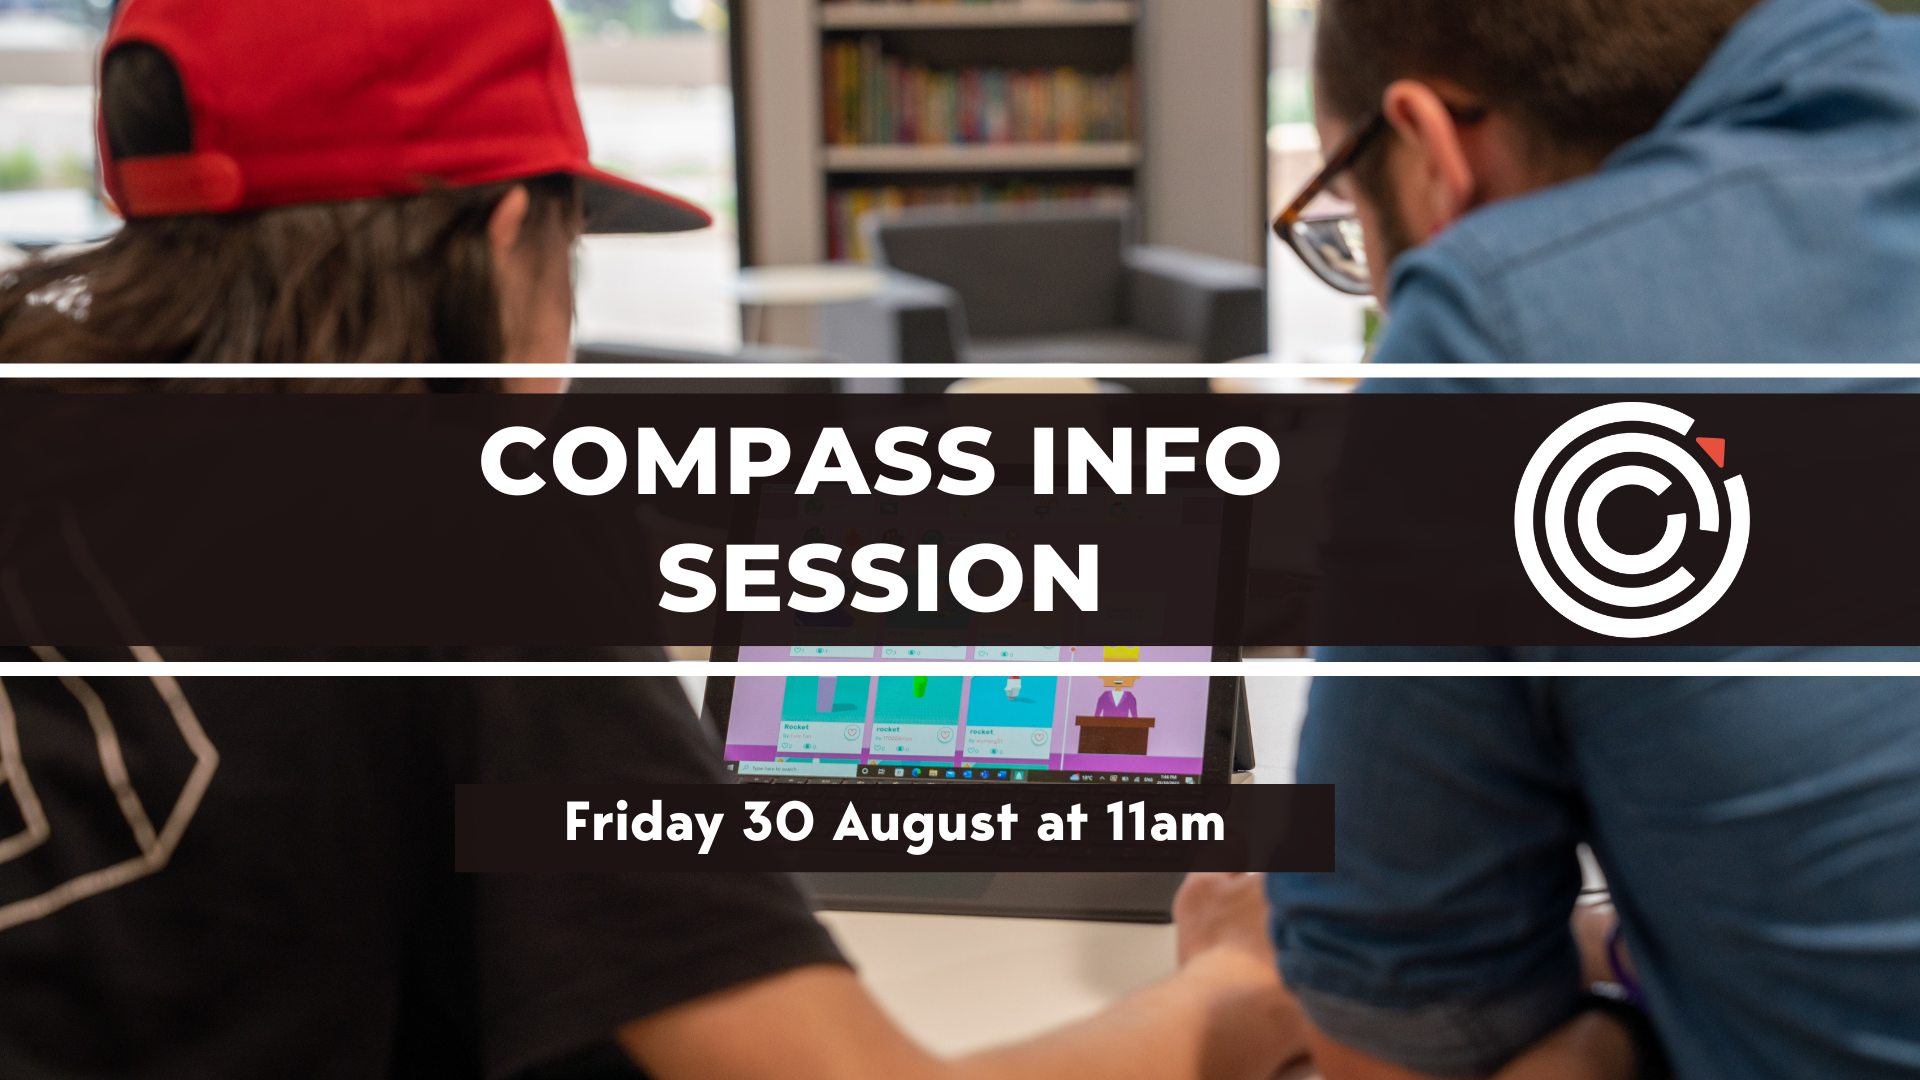 Compass Info Session Friday 30 August 